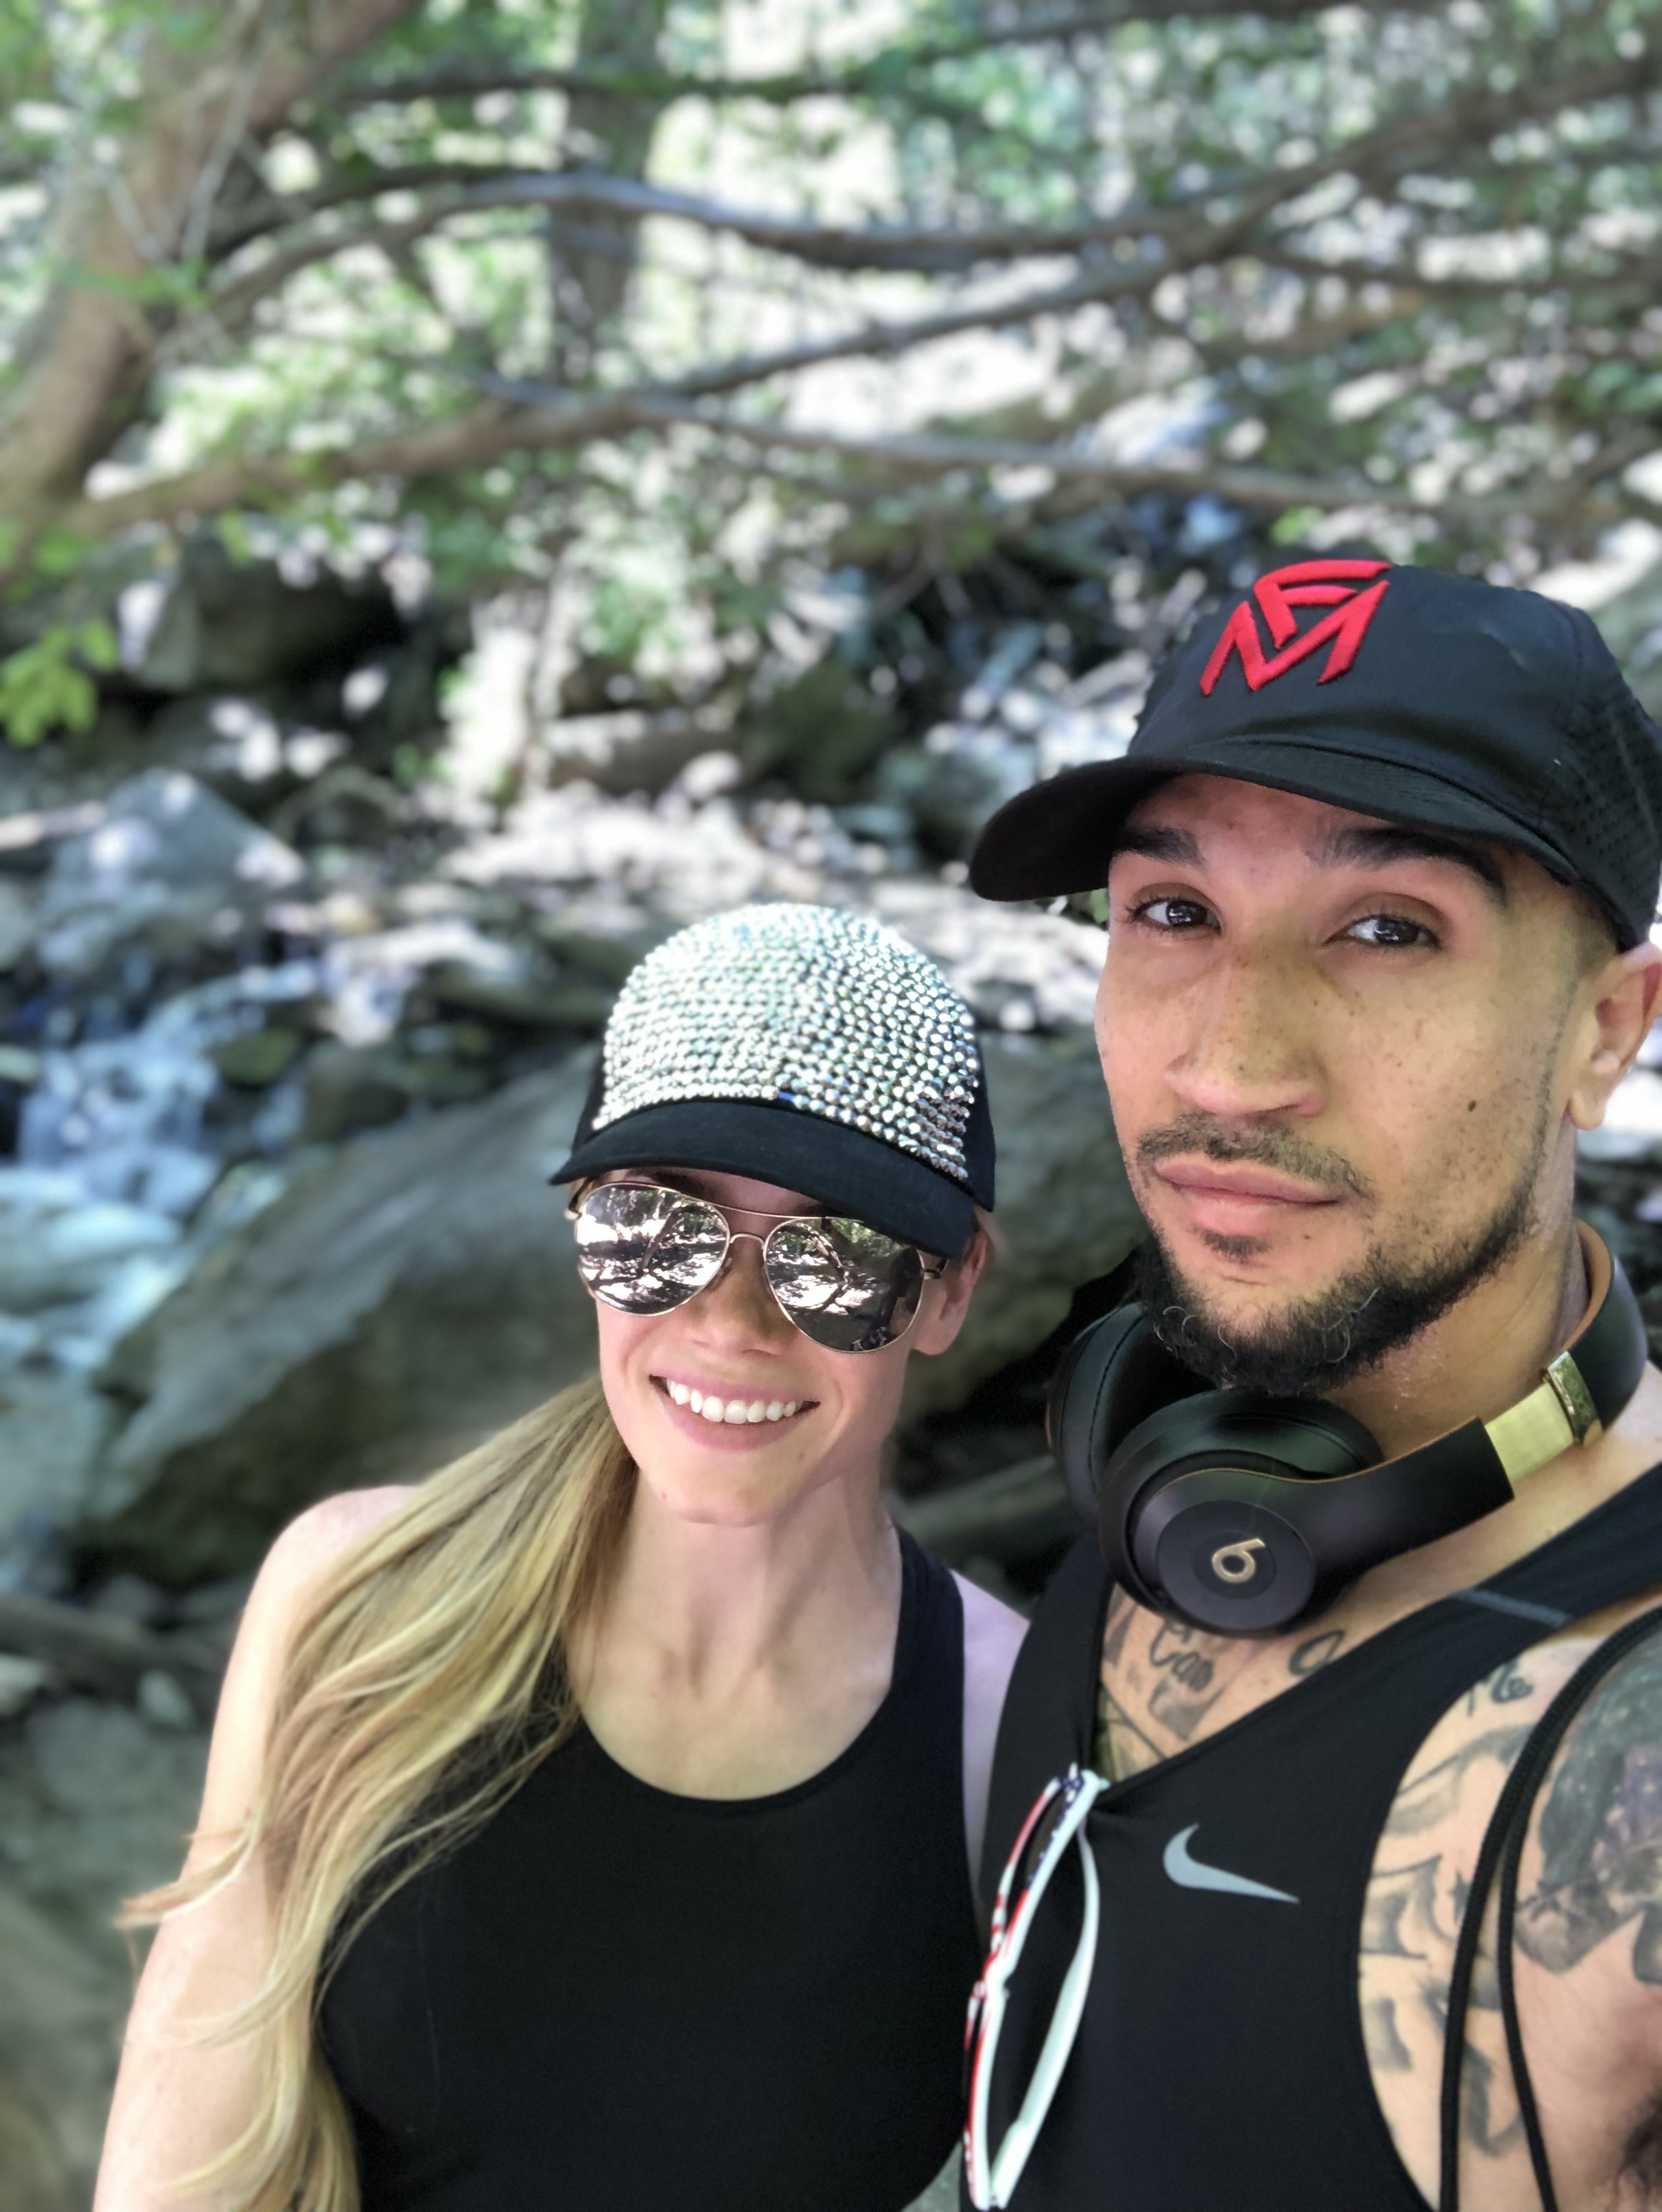 75 Hard Journey - 4th of July hike, we loved staying sober and getting active over the holiday weekend